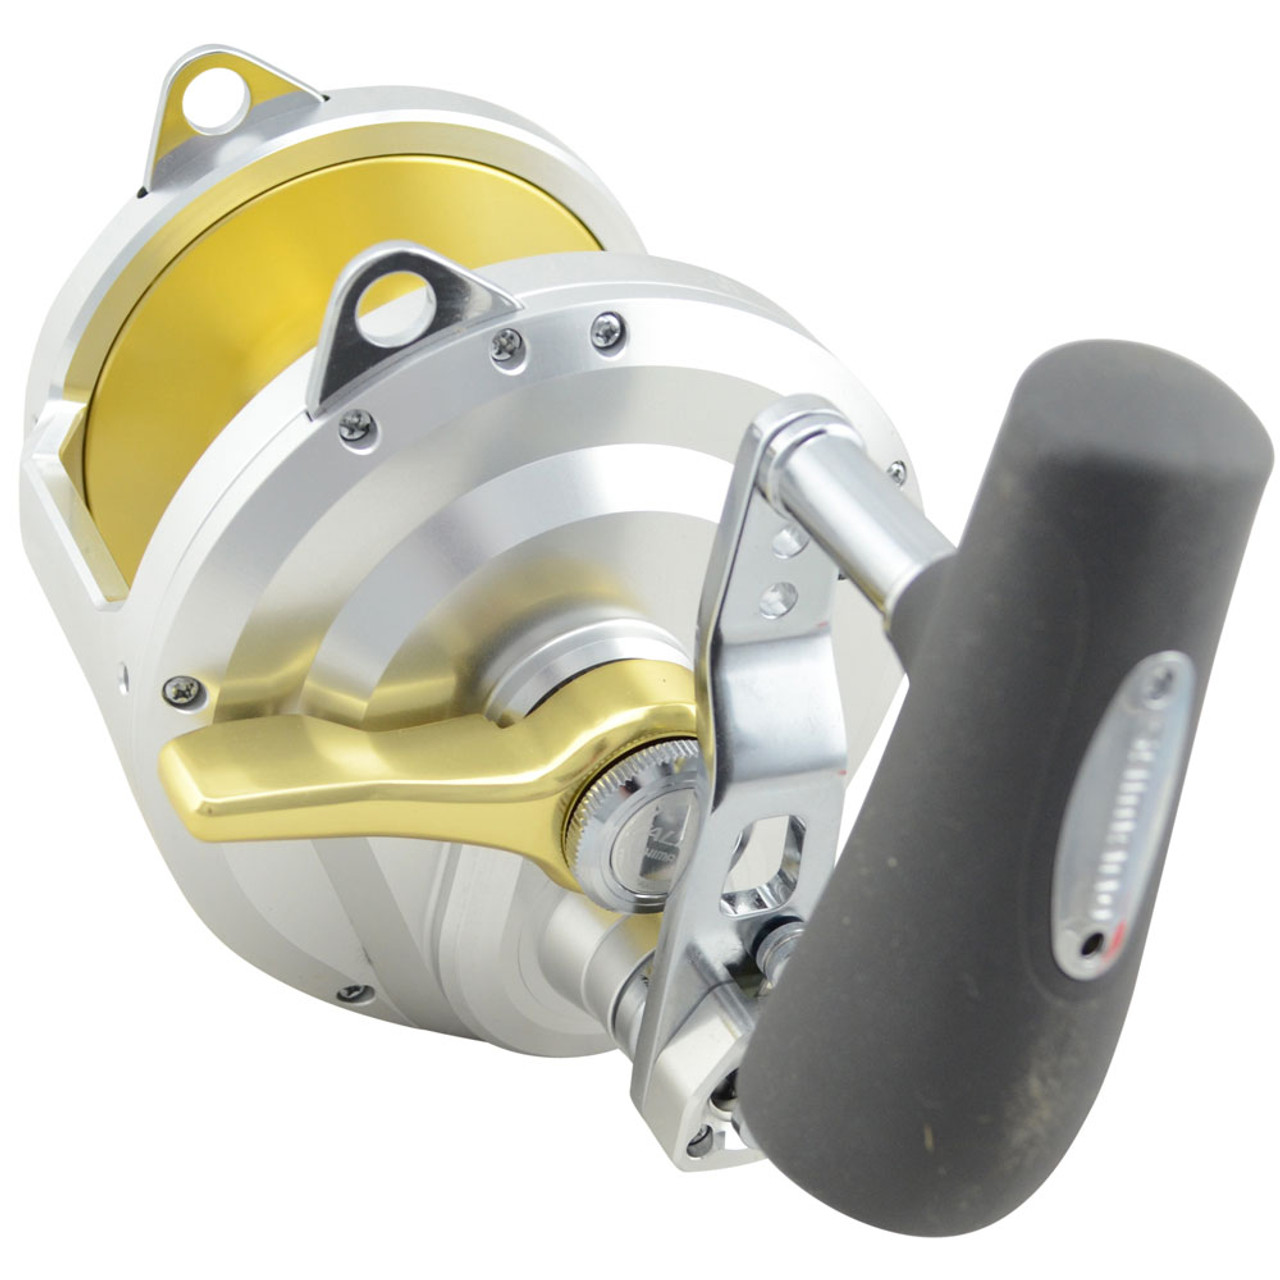 Find Opening Sales Shimano Talica Fishing Reel TAC50 2 Speed get free  shipping on orders over $50